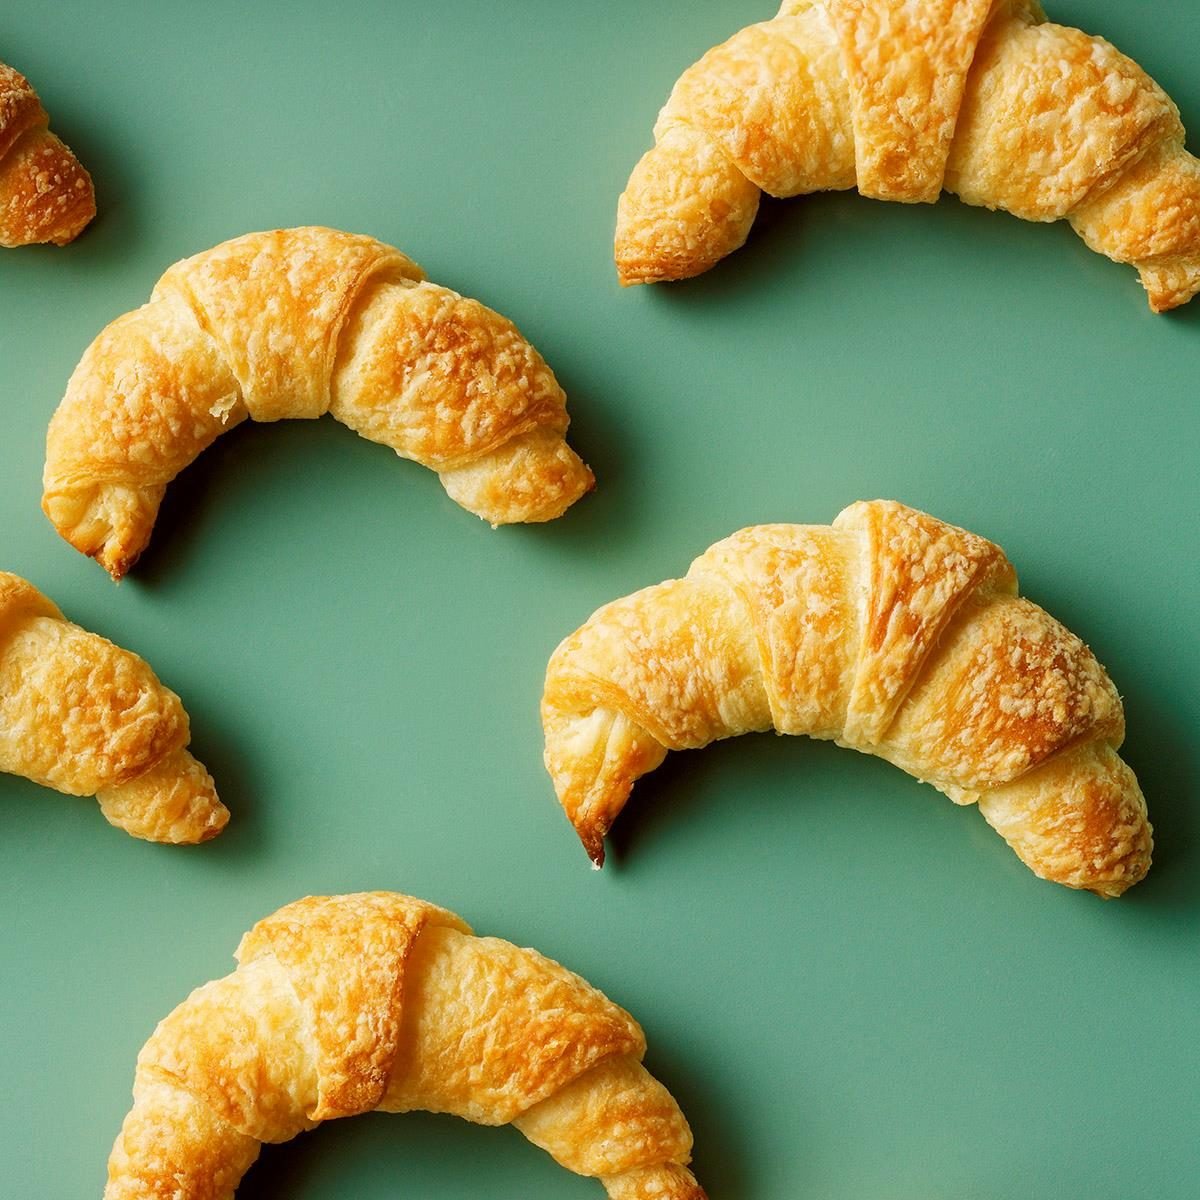 Homemade Croissants Recipe: How to Make It